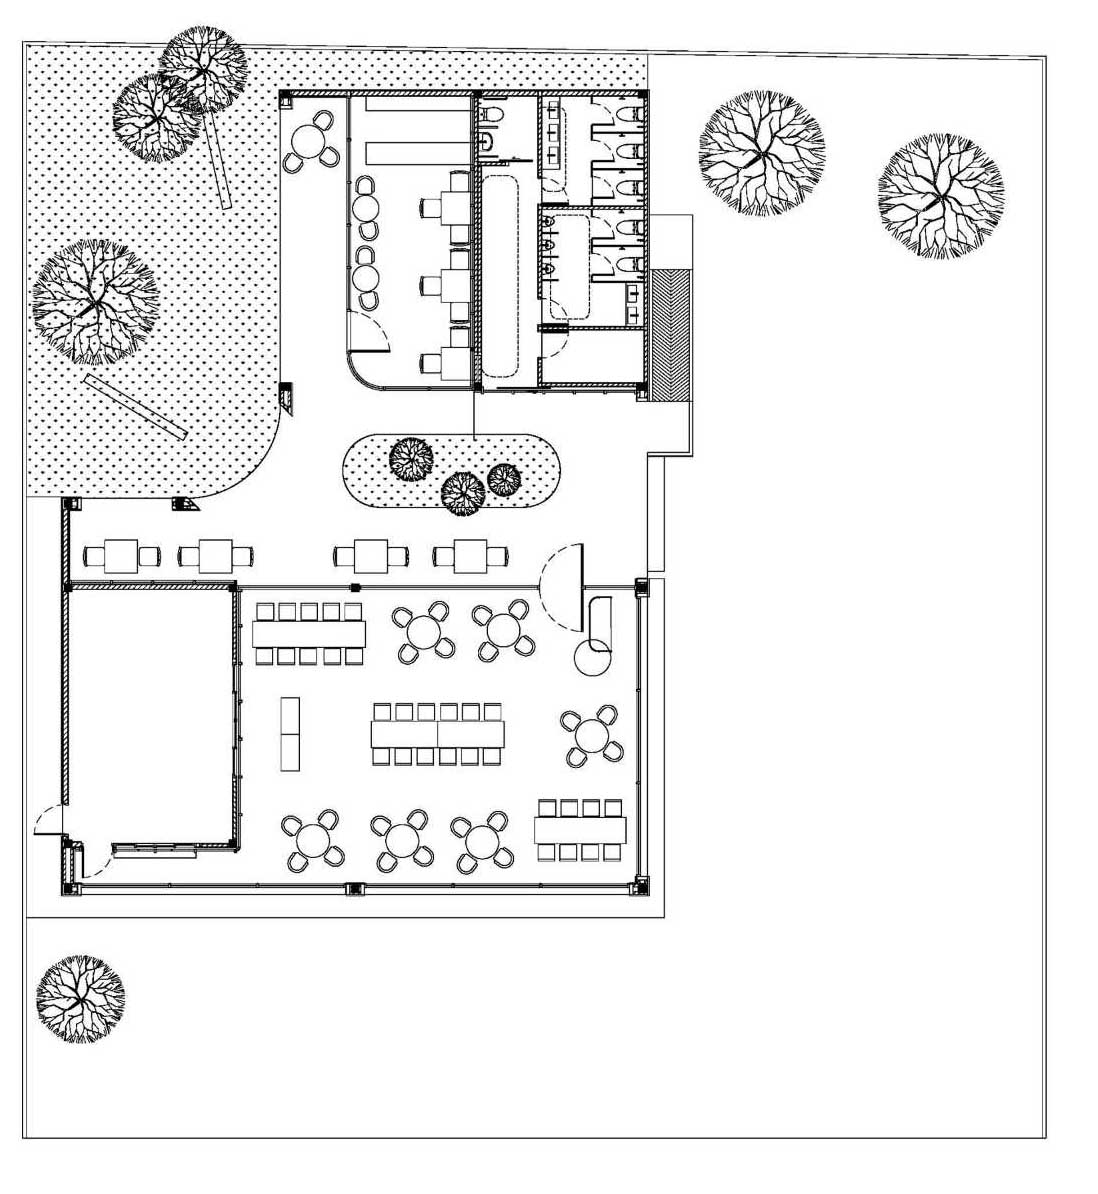 The floor plan of a restaurant and cafe.